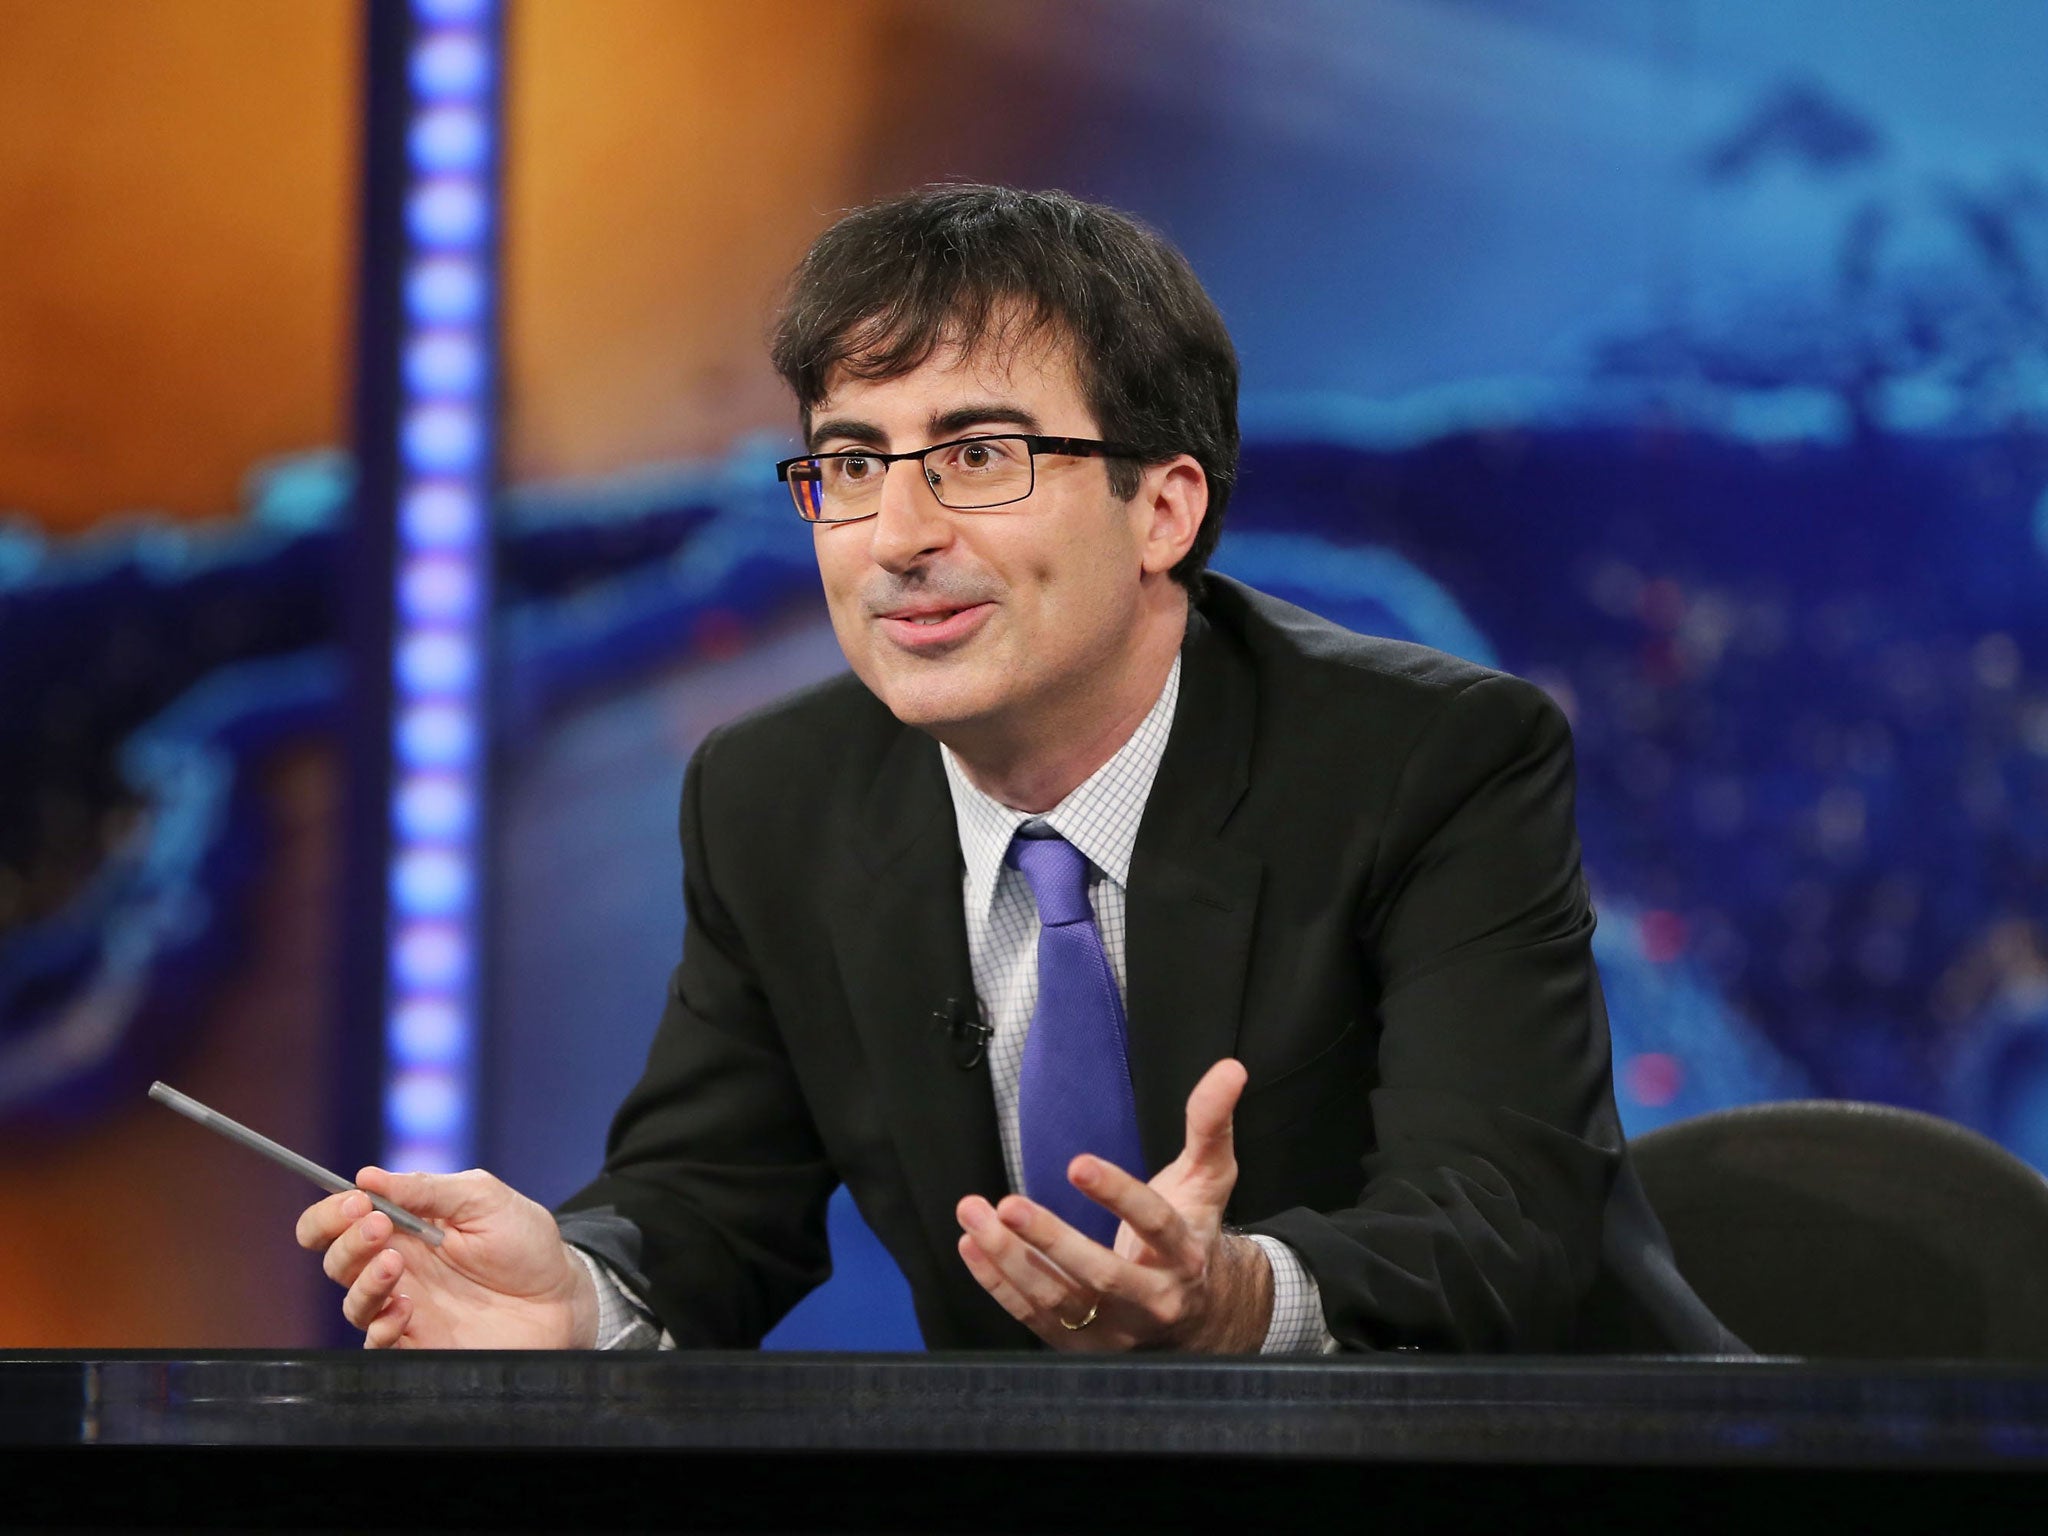 John Oliver has now landed his own show with the premier US network HBO